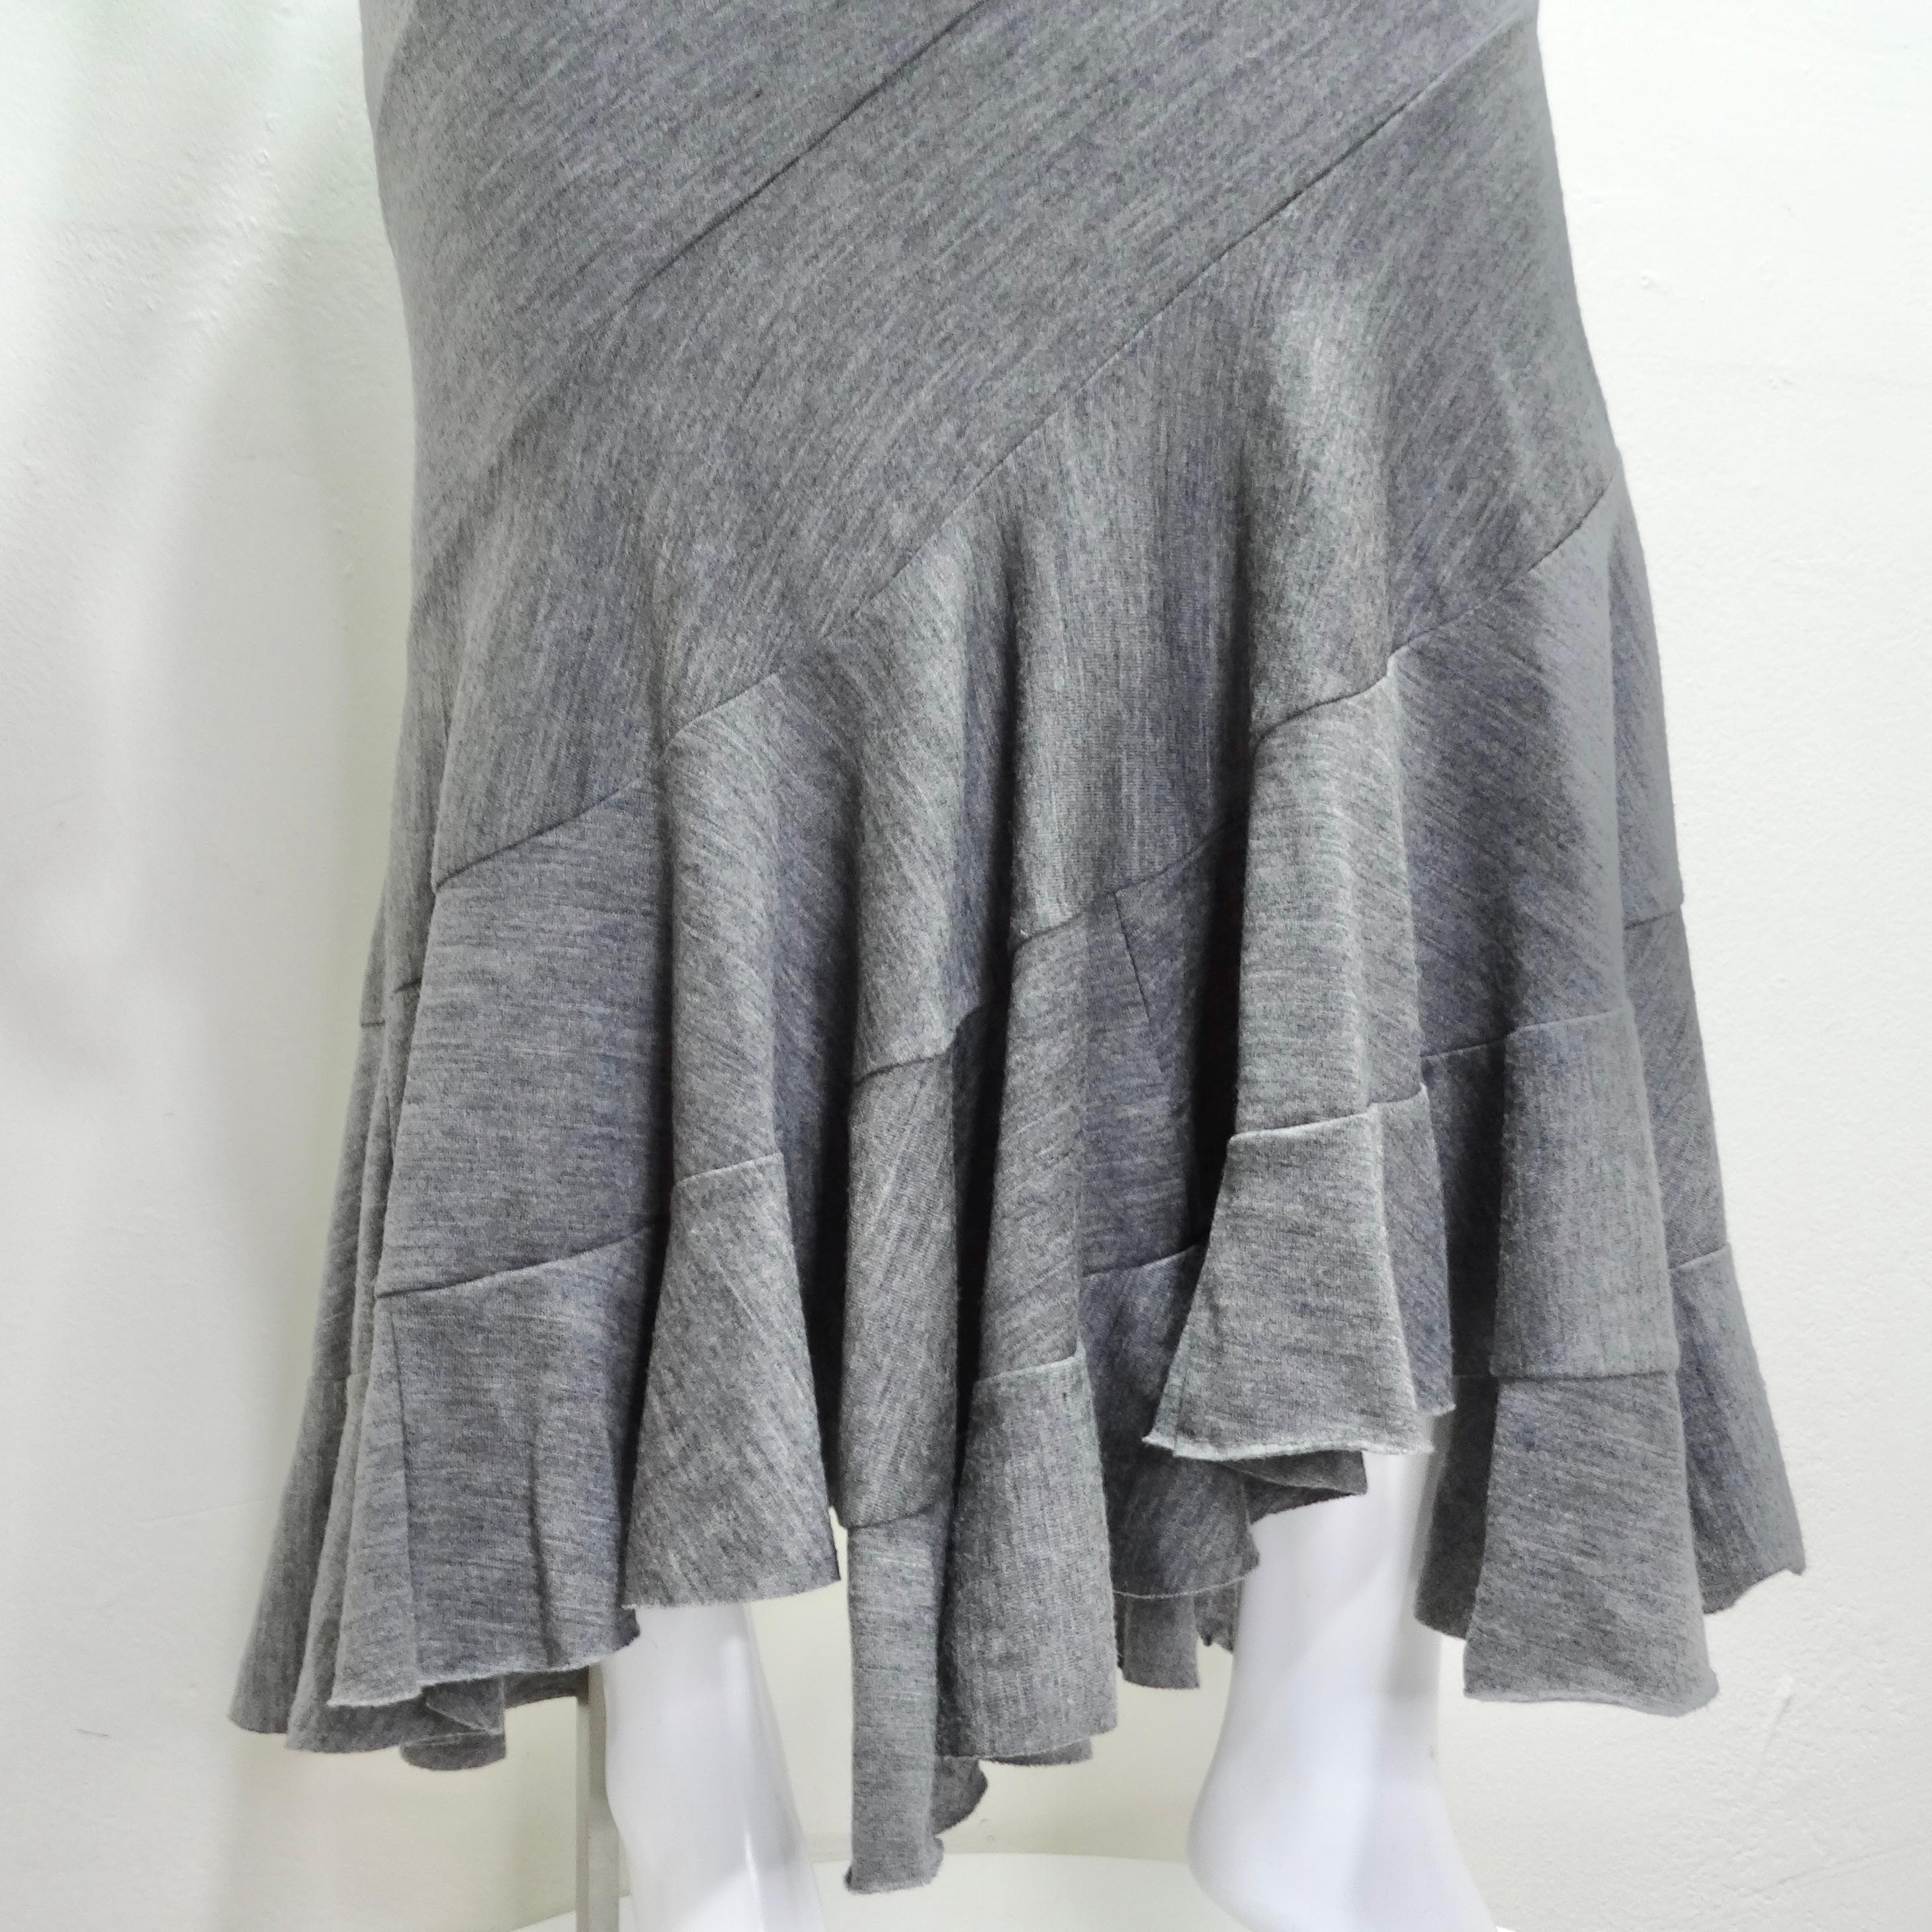 Introducing the Junya Watanabe Comme Des Garcons Grey Wool Tube Skirt/Dress – a masterful creation that seamlessly combines avant-garde design with versatility and comfort. This stretchy grey wool tube dress/skirt is a true fashion chameleon,